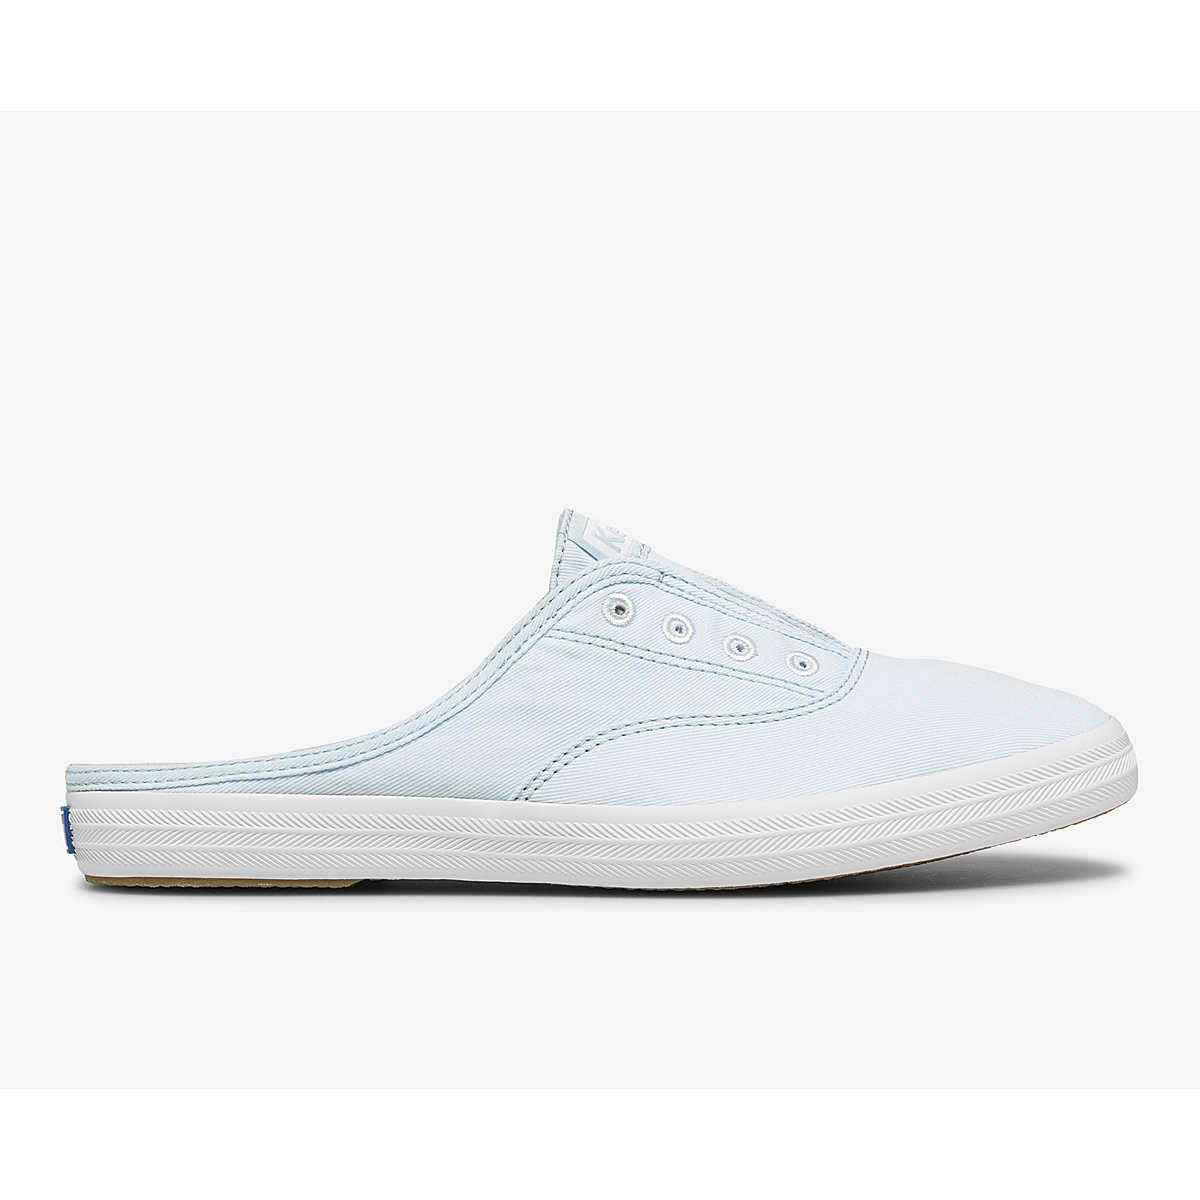 Keds Washable Moxie Mule Feat. Organic Cotton In Light Blue